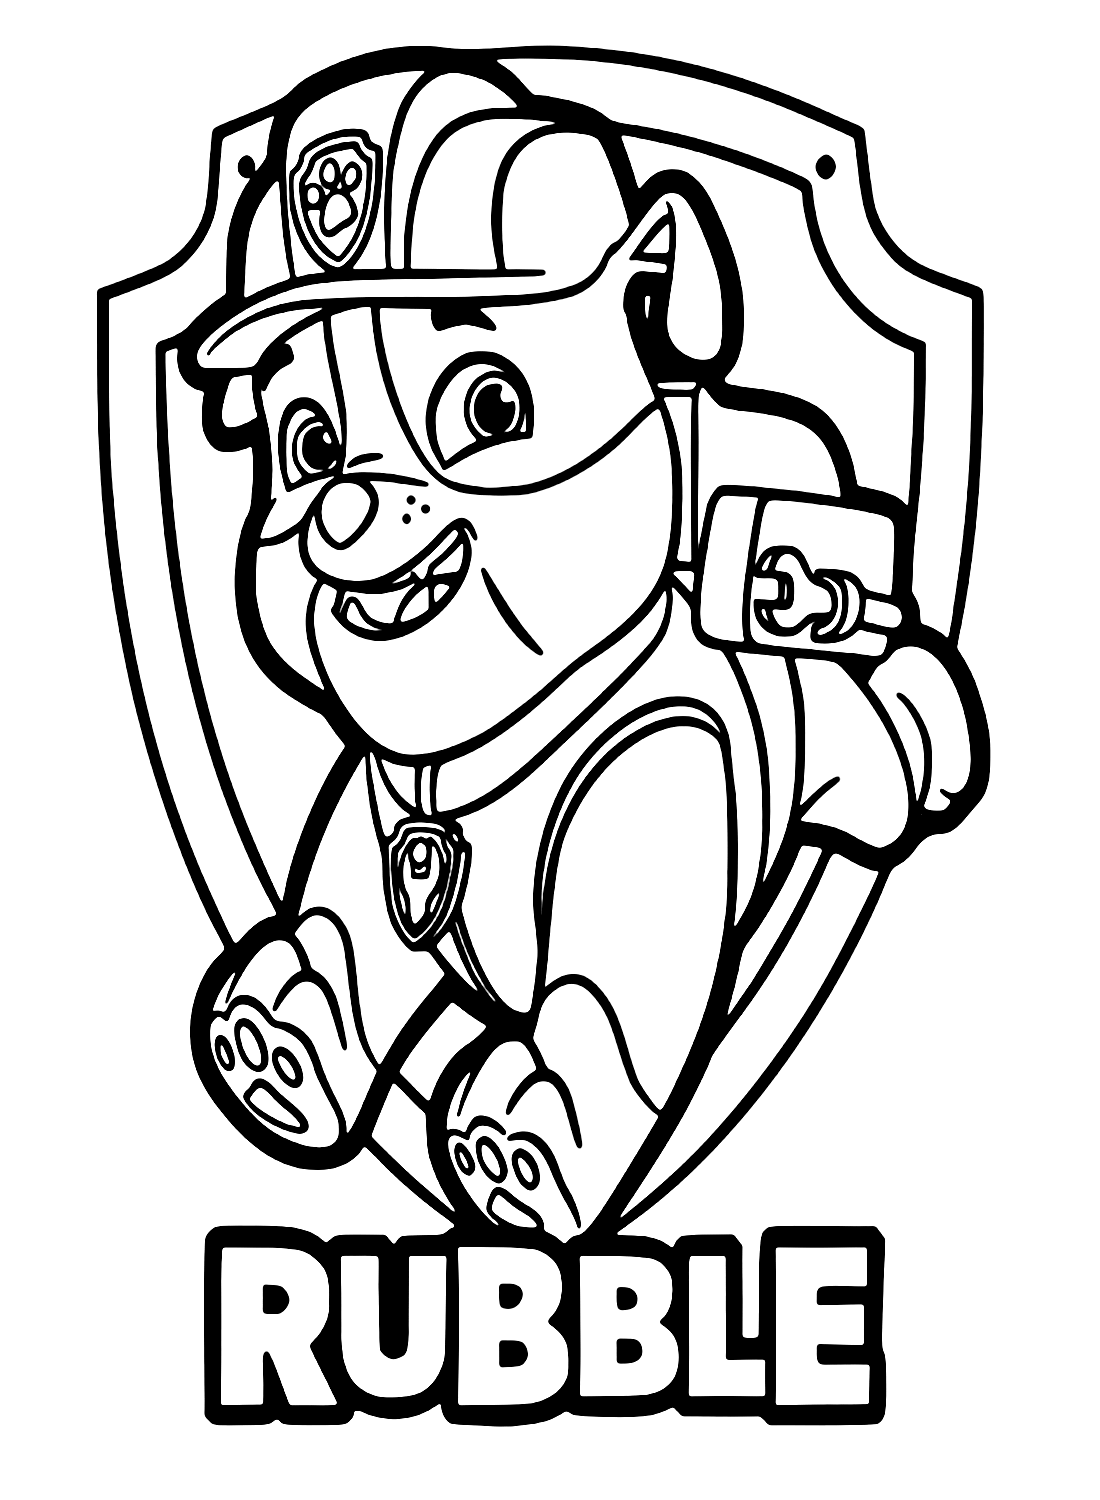 Cute Rubble Paw Patrol Coloring Pages